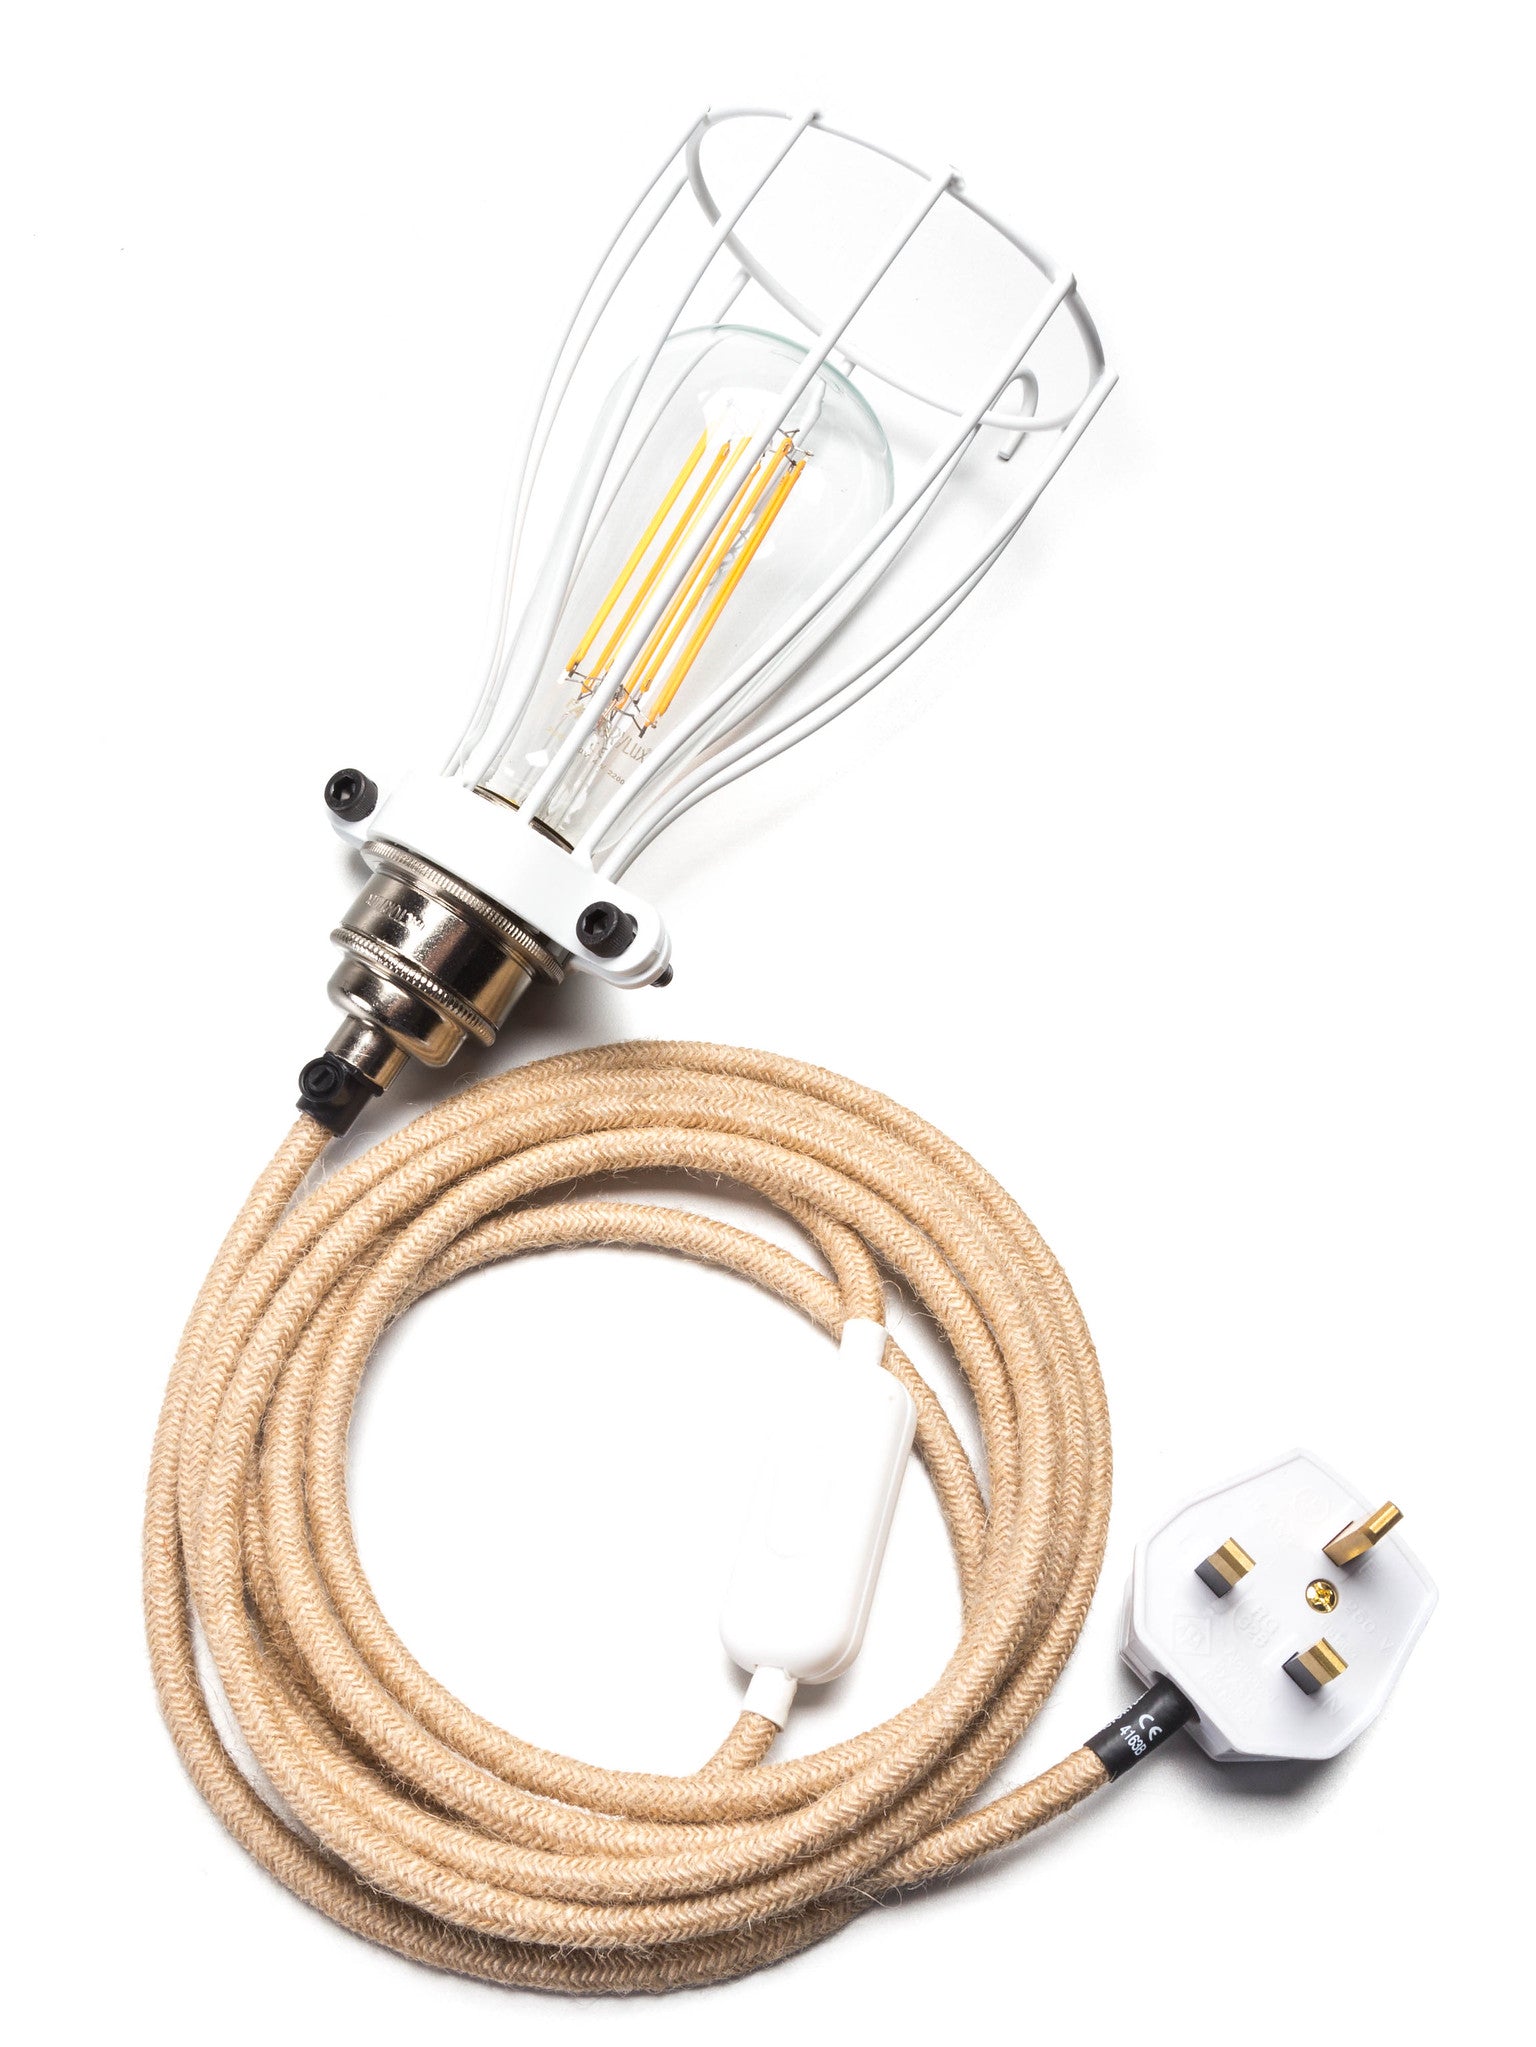 White Inspection Lamp | End-Of-Line